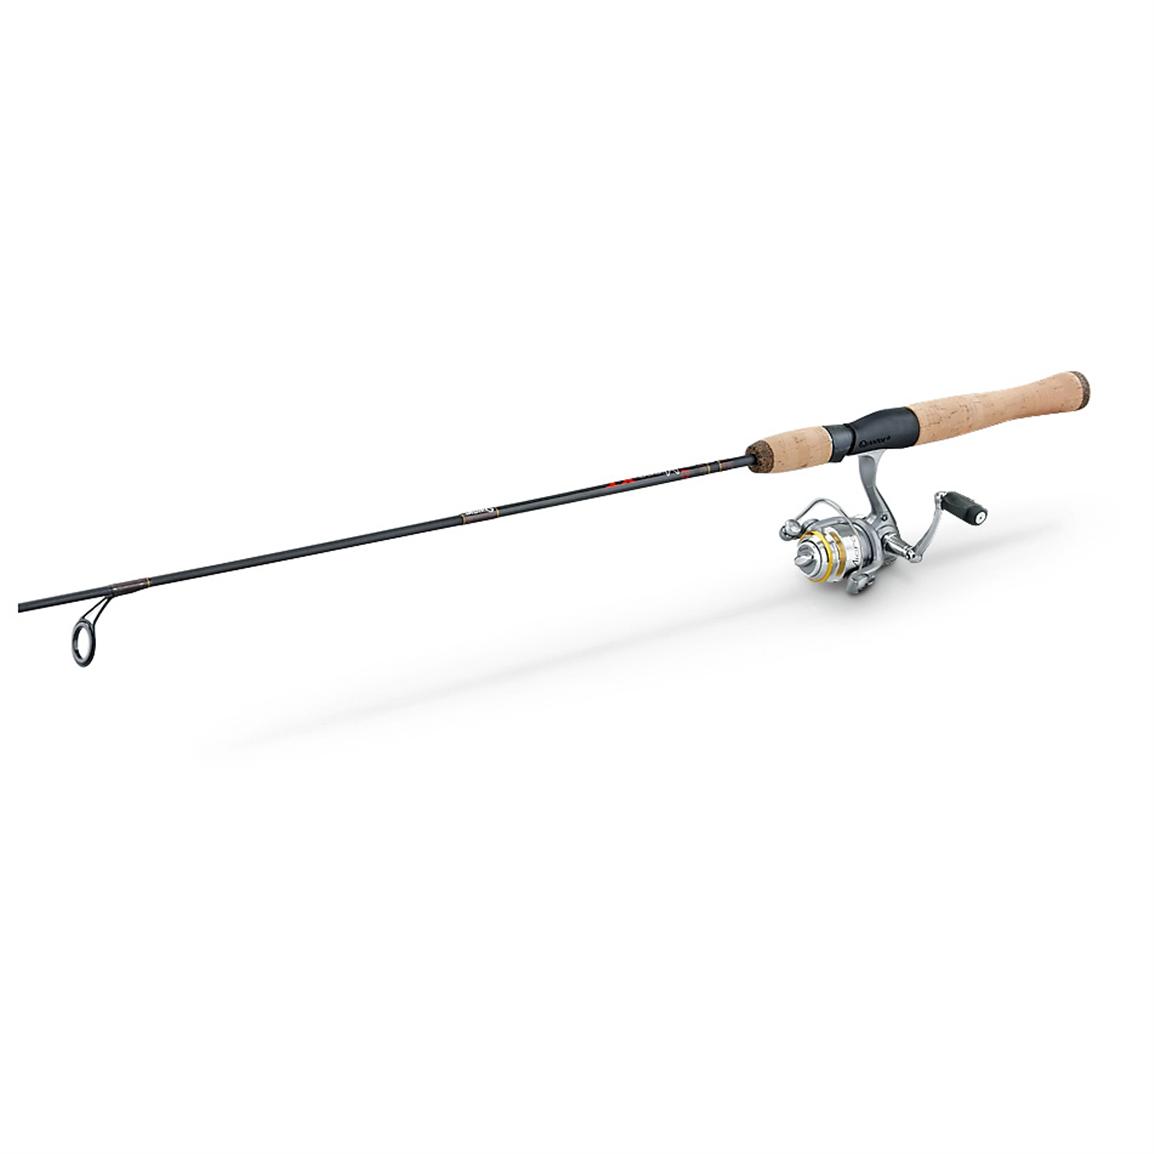 Quantum® Micro Ultralight 6'0" Spinning Rod and Reel Combo